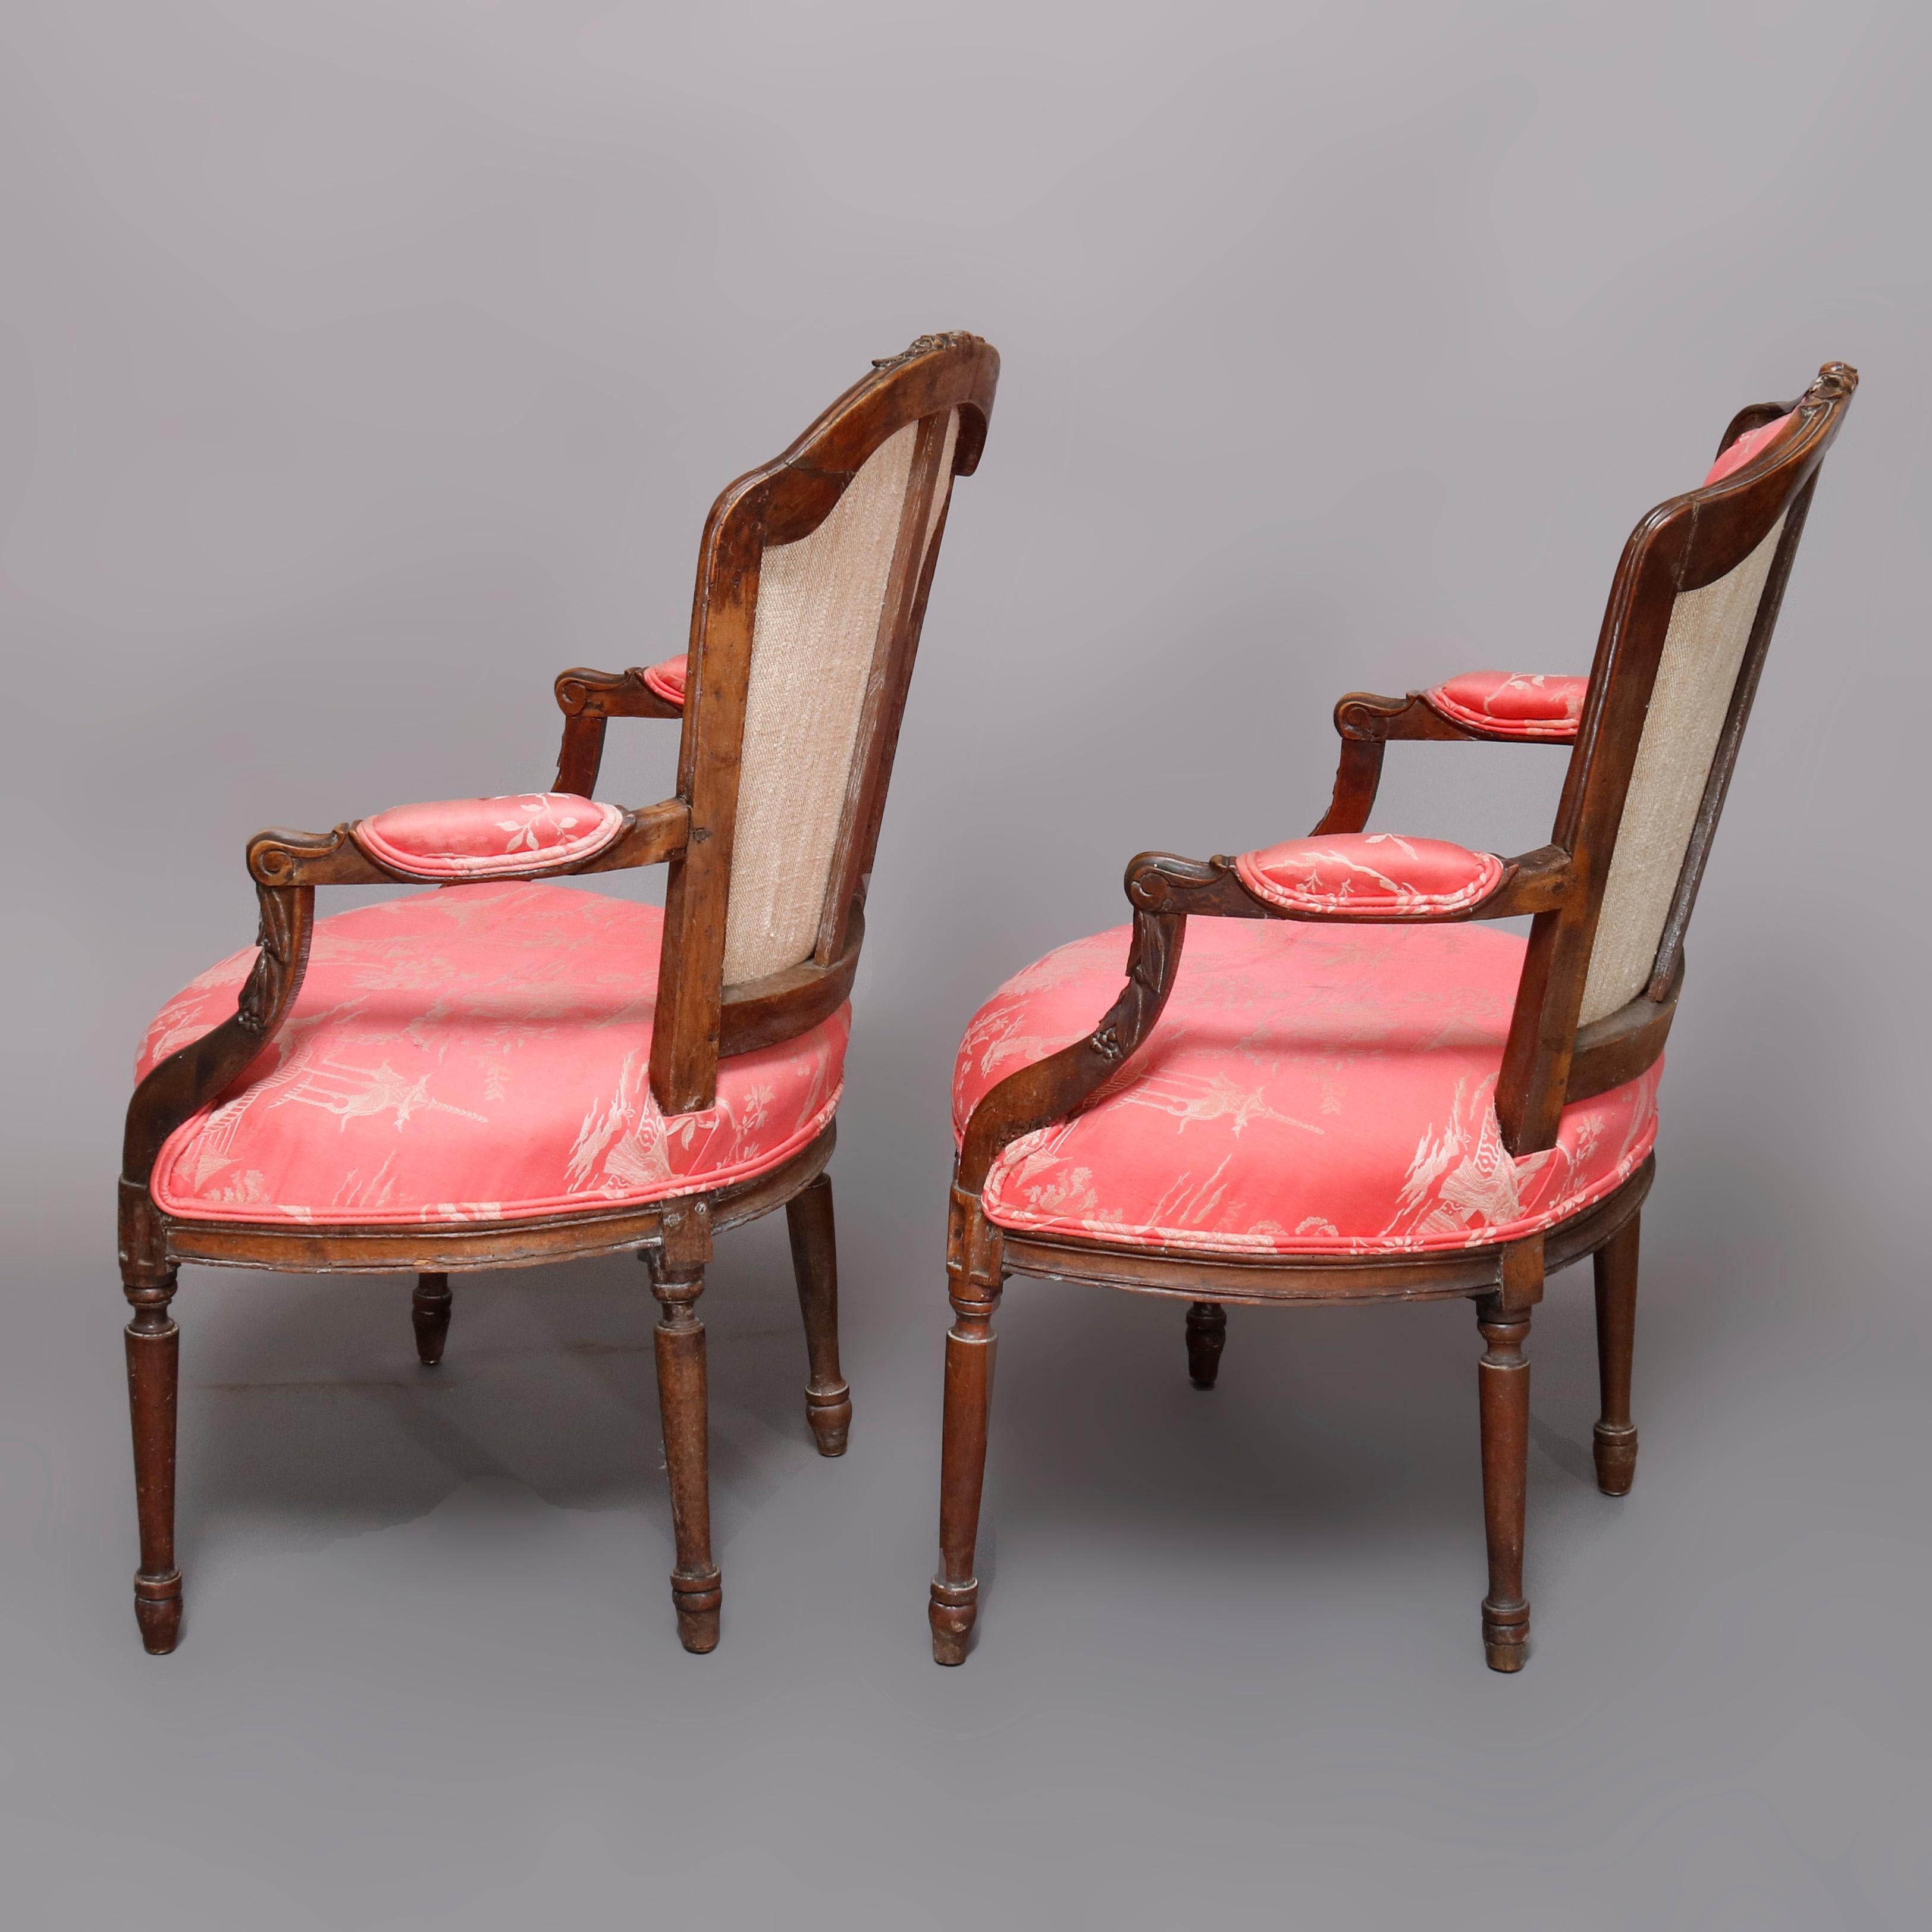 European Pair of 18th Century French Louis XVI Carved Fruitwood and Upholstered Armchairs